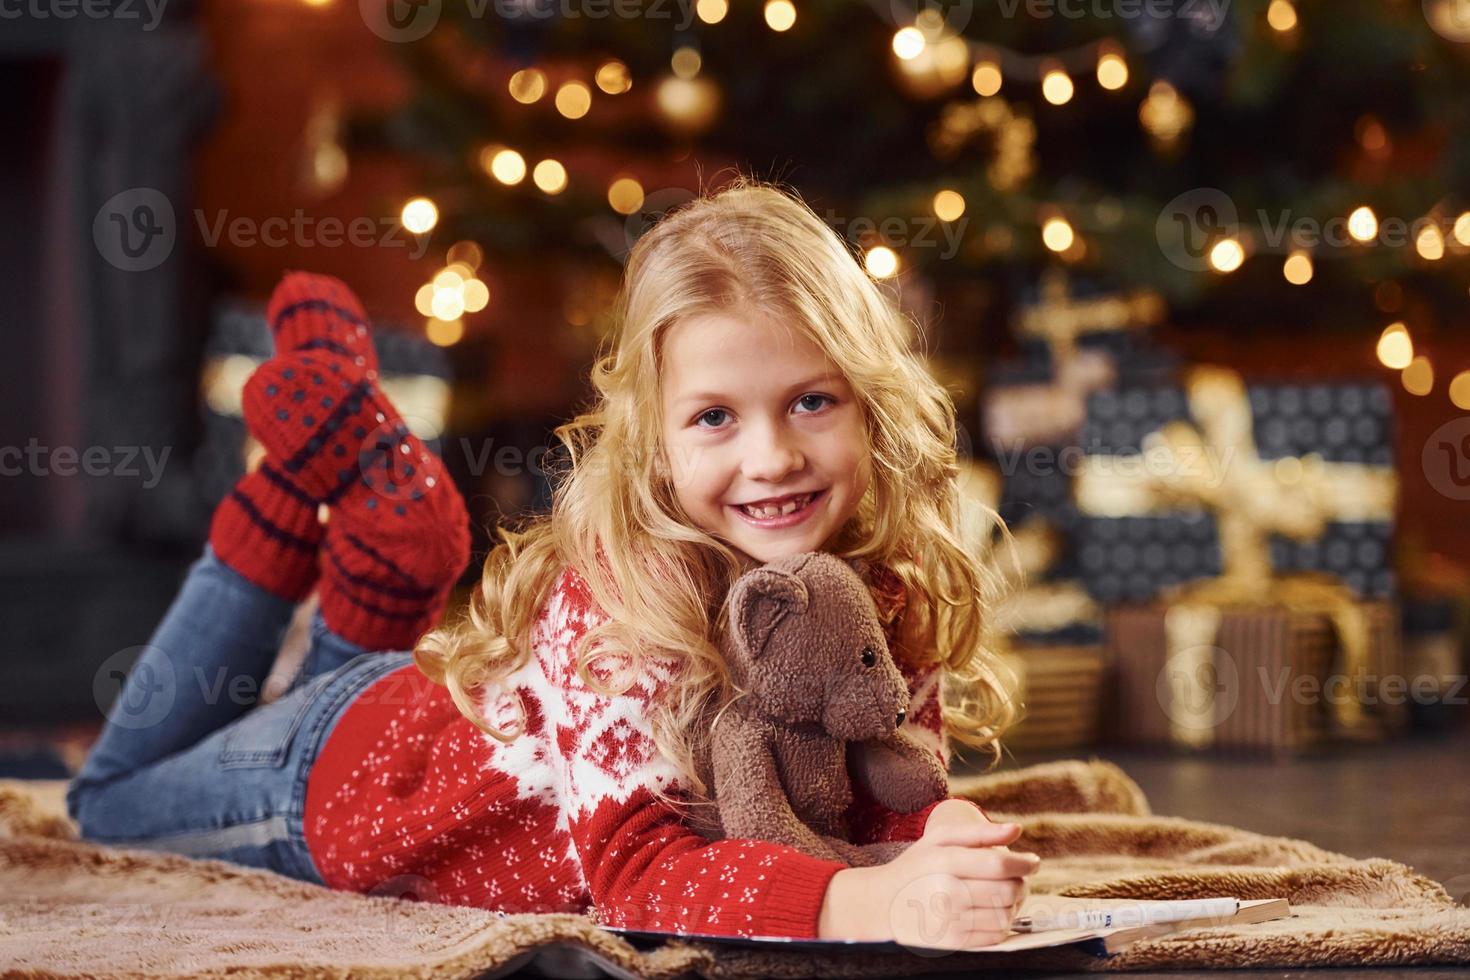 Cute little girl in red festive sweater lying down with teddy bear indoors celebrating new year photo